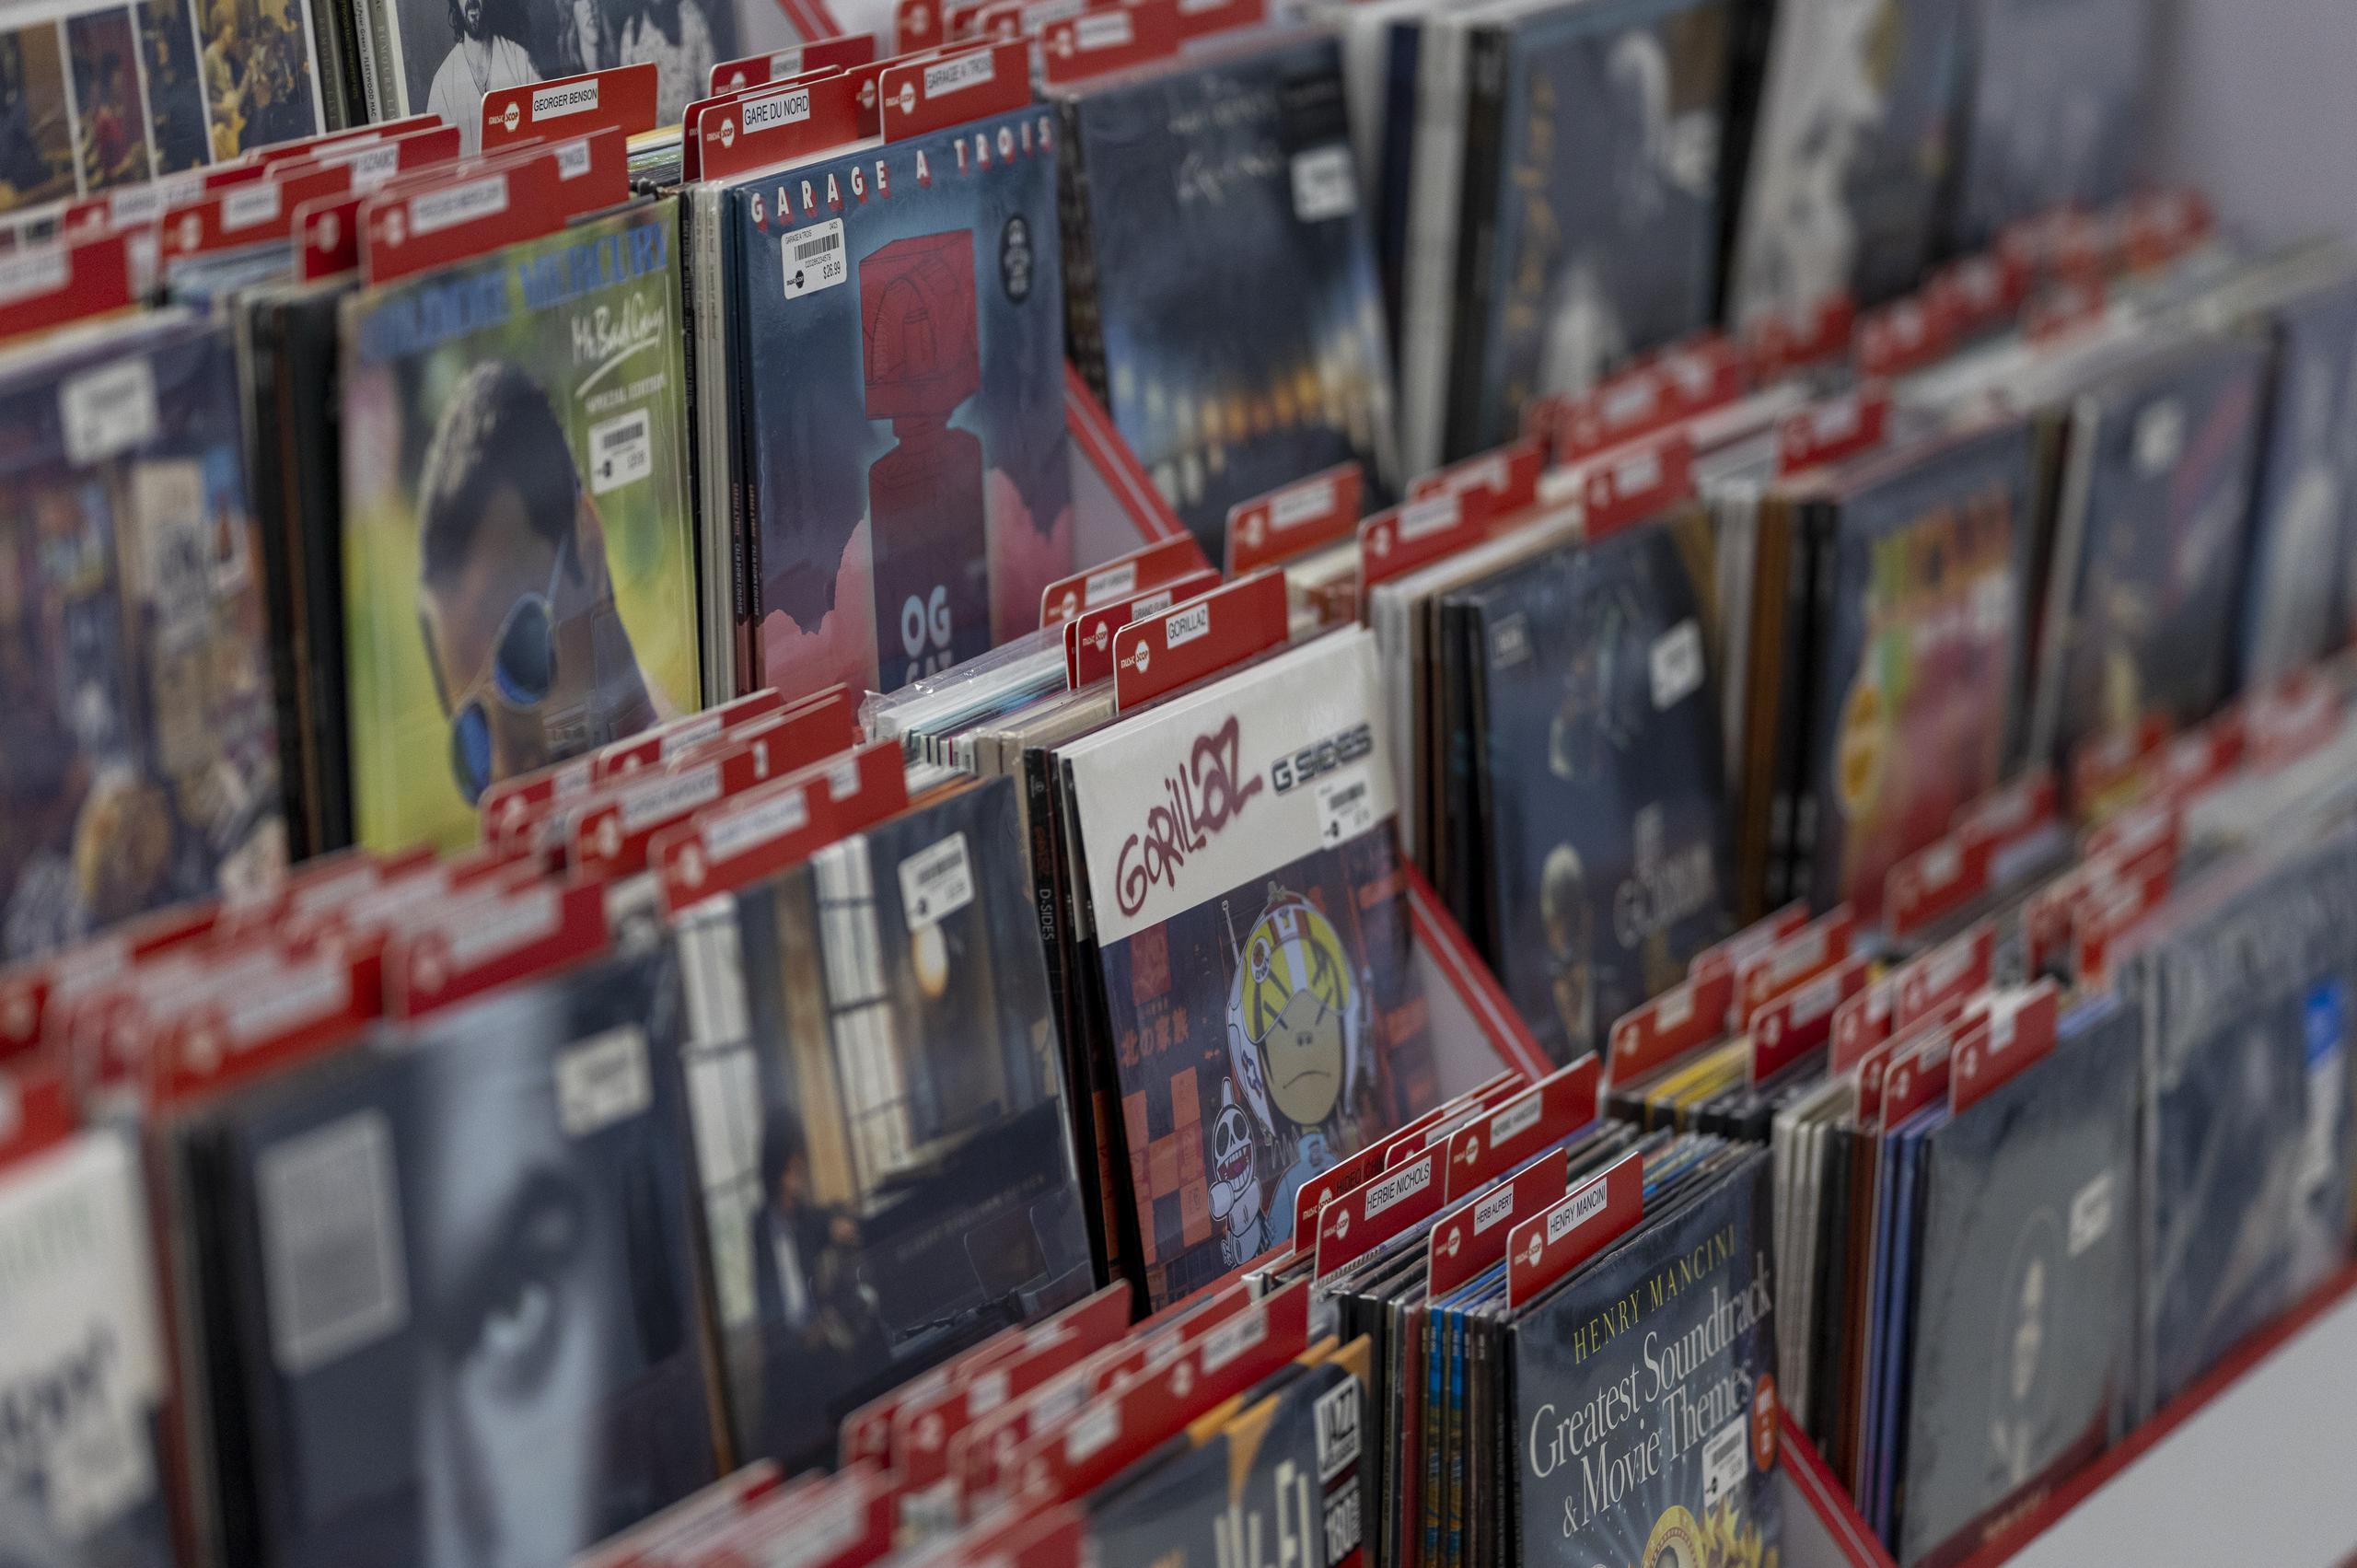 Music Stop remains the store with the largest supply of vinyl records in the Caribbean.